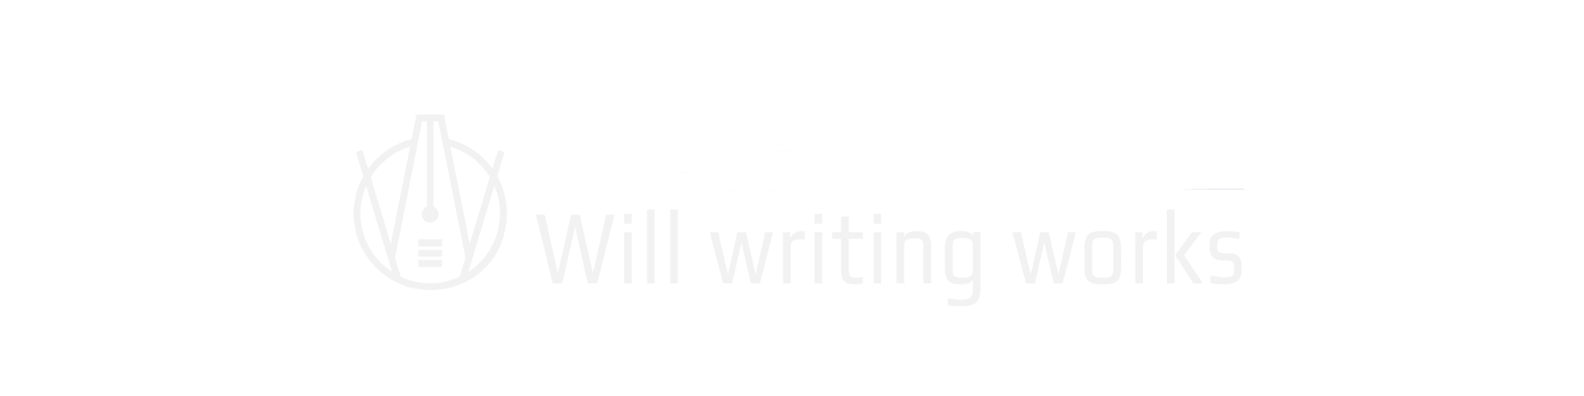 Will writing works